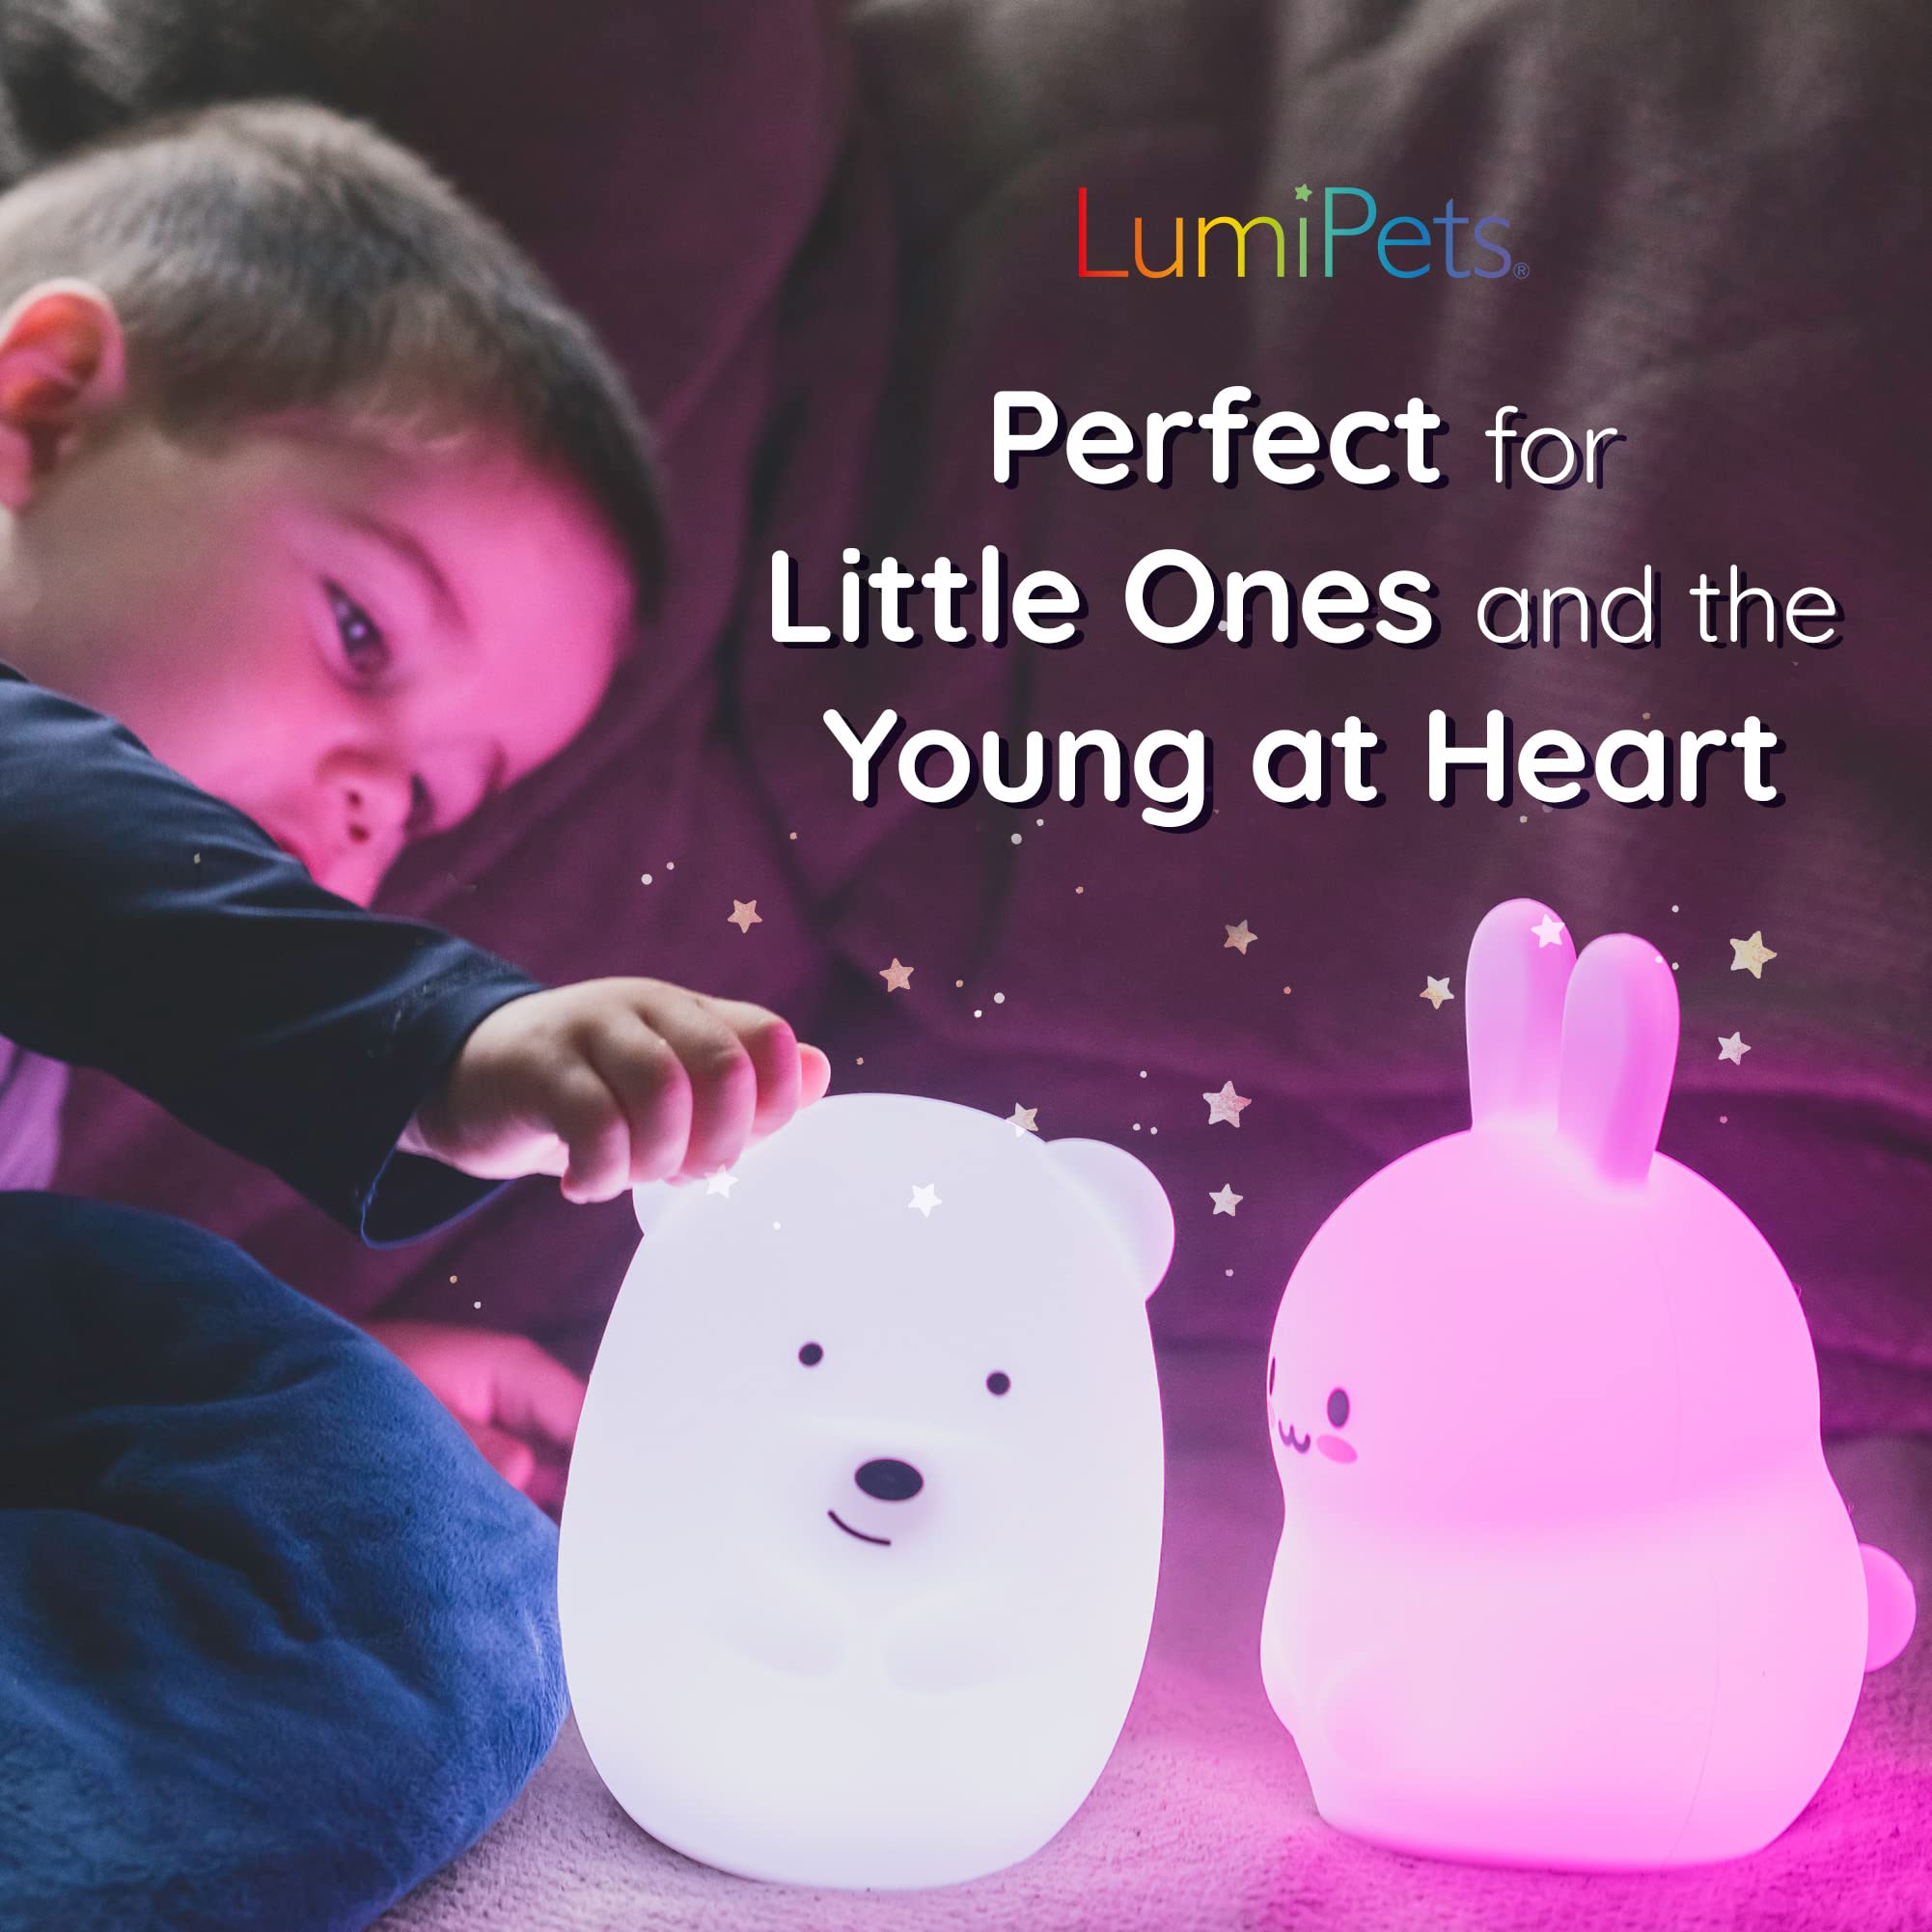 LED Nursery Night Lights for Kids: LumiPets Cute Animal Silicone Baby Night Light with Touch Sensor and Remote - Portable and Rechargeable Infant or Toddler Cool Color Changing Bright Nightlight Lamp